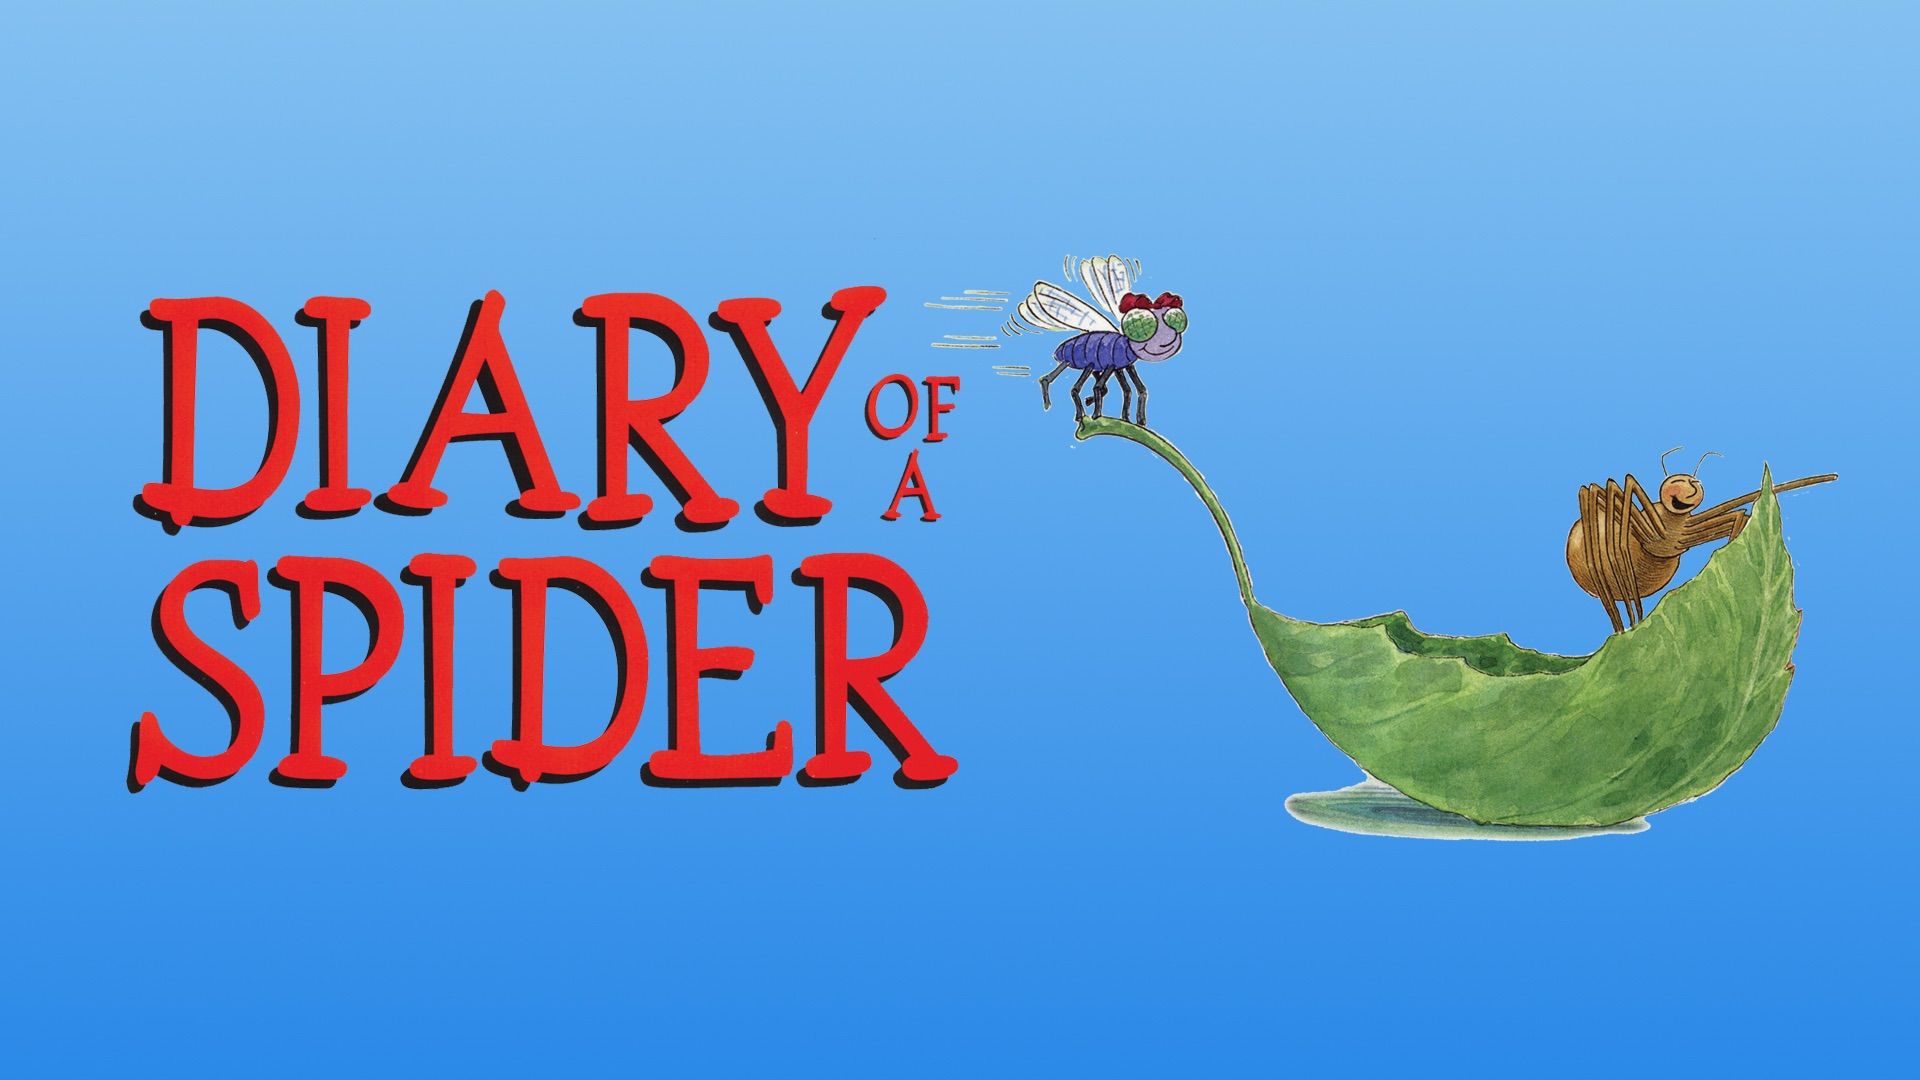 Diary of a Spider Backdrop